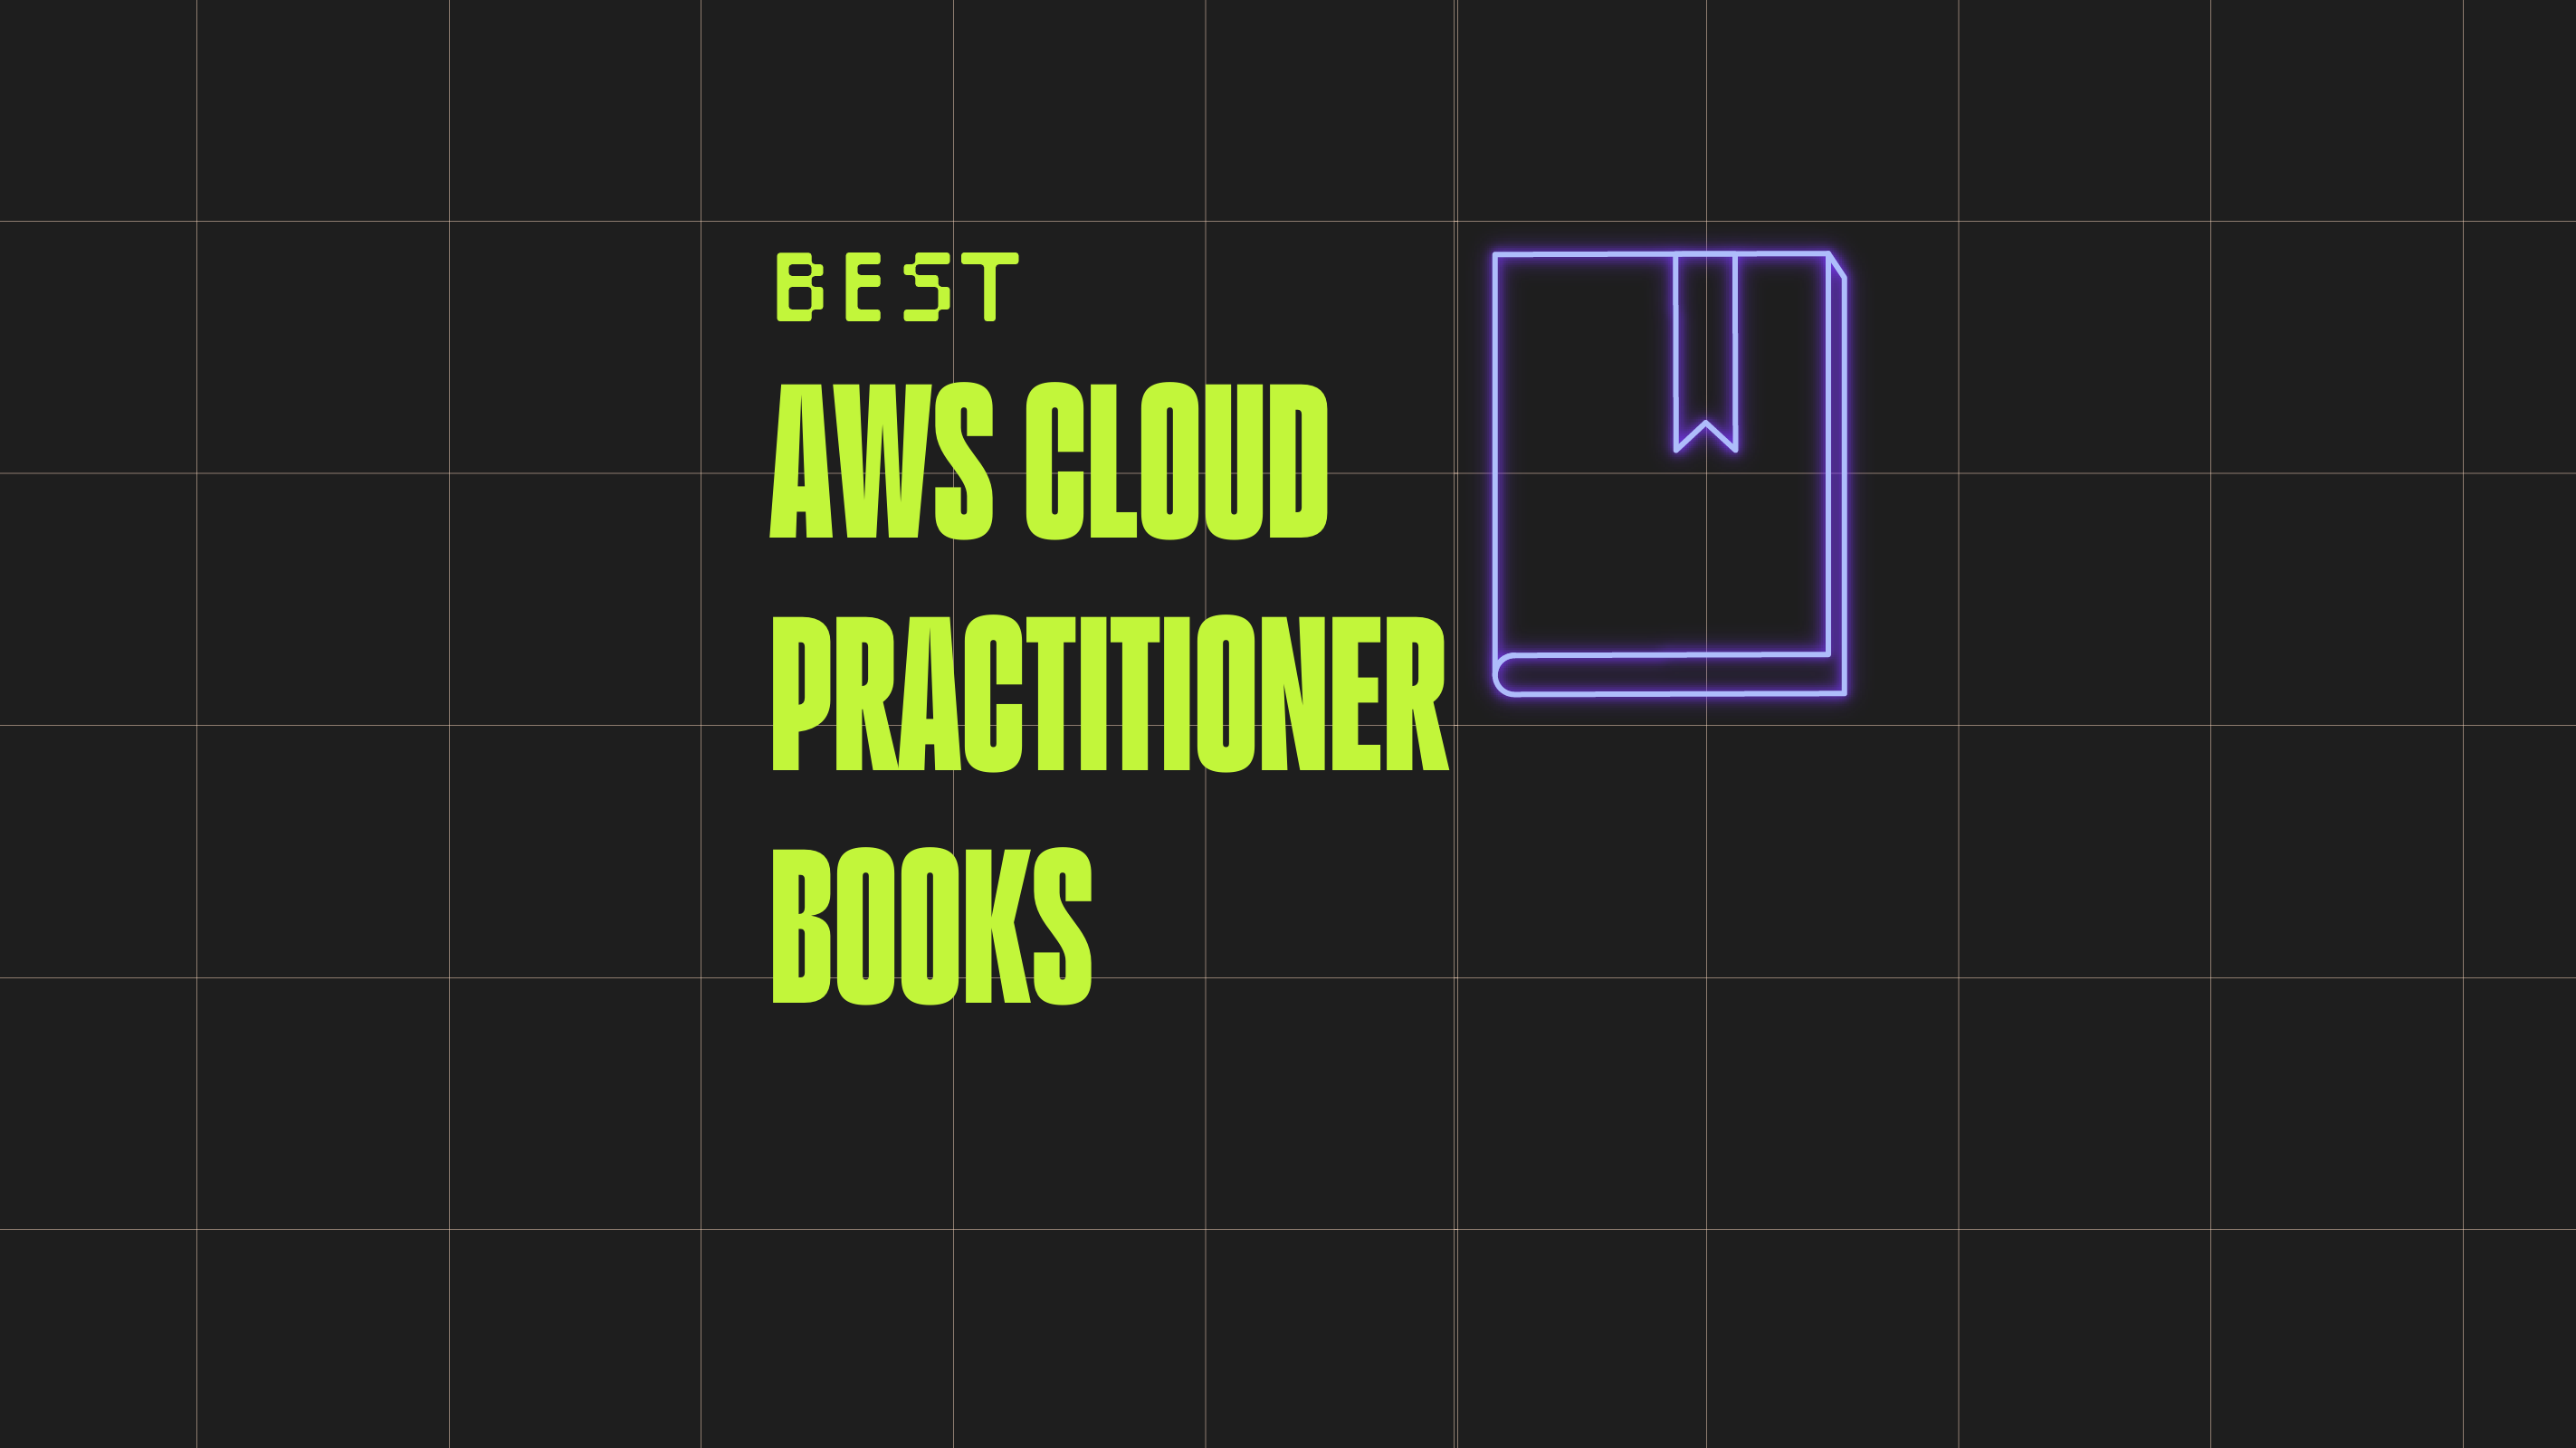 CTO-aws-cloud-practitioner-books-featured-image-6388